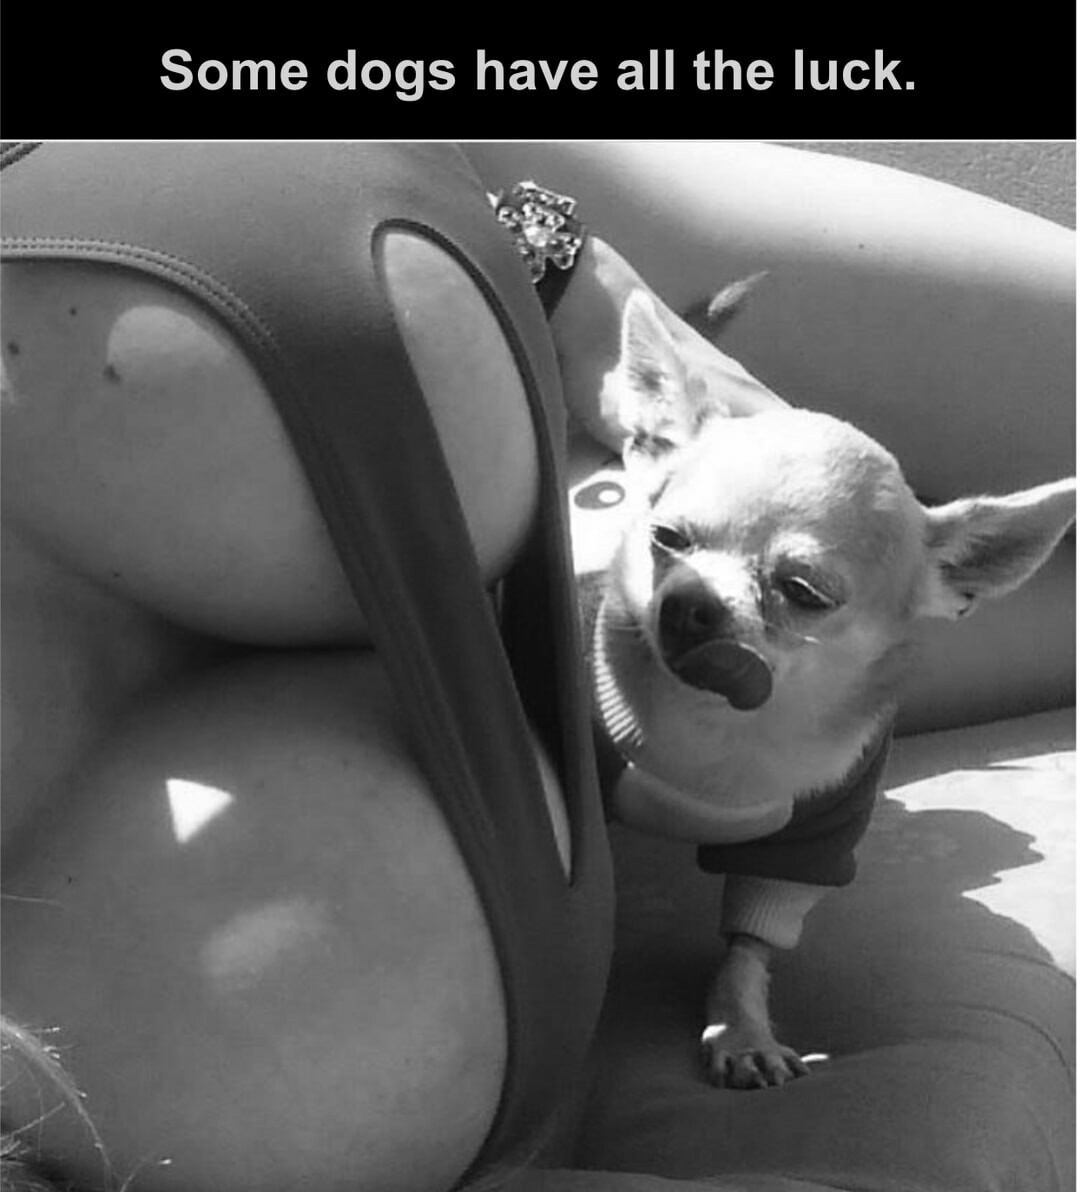 And some women attract all the dogs. - meme